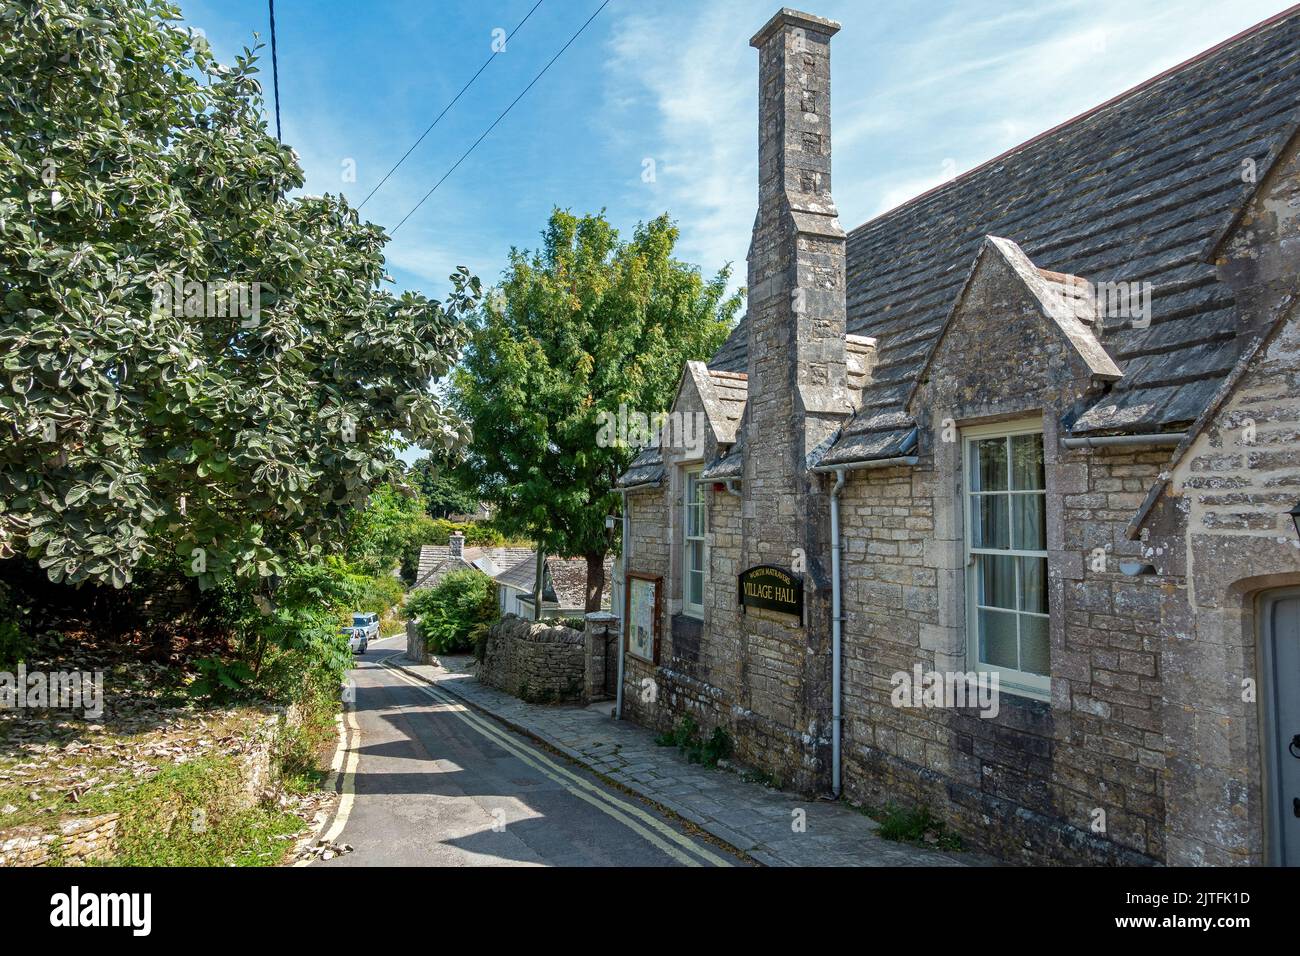 The exterior of the village hall in Worth Matravers near Swanage, Dorset, England Stock Photo